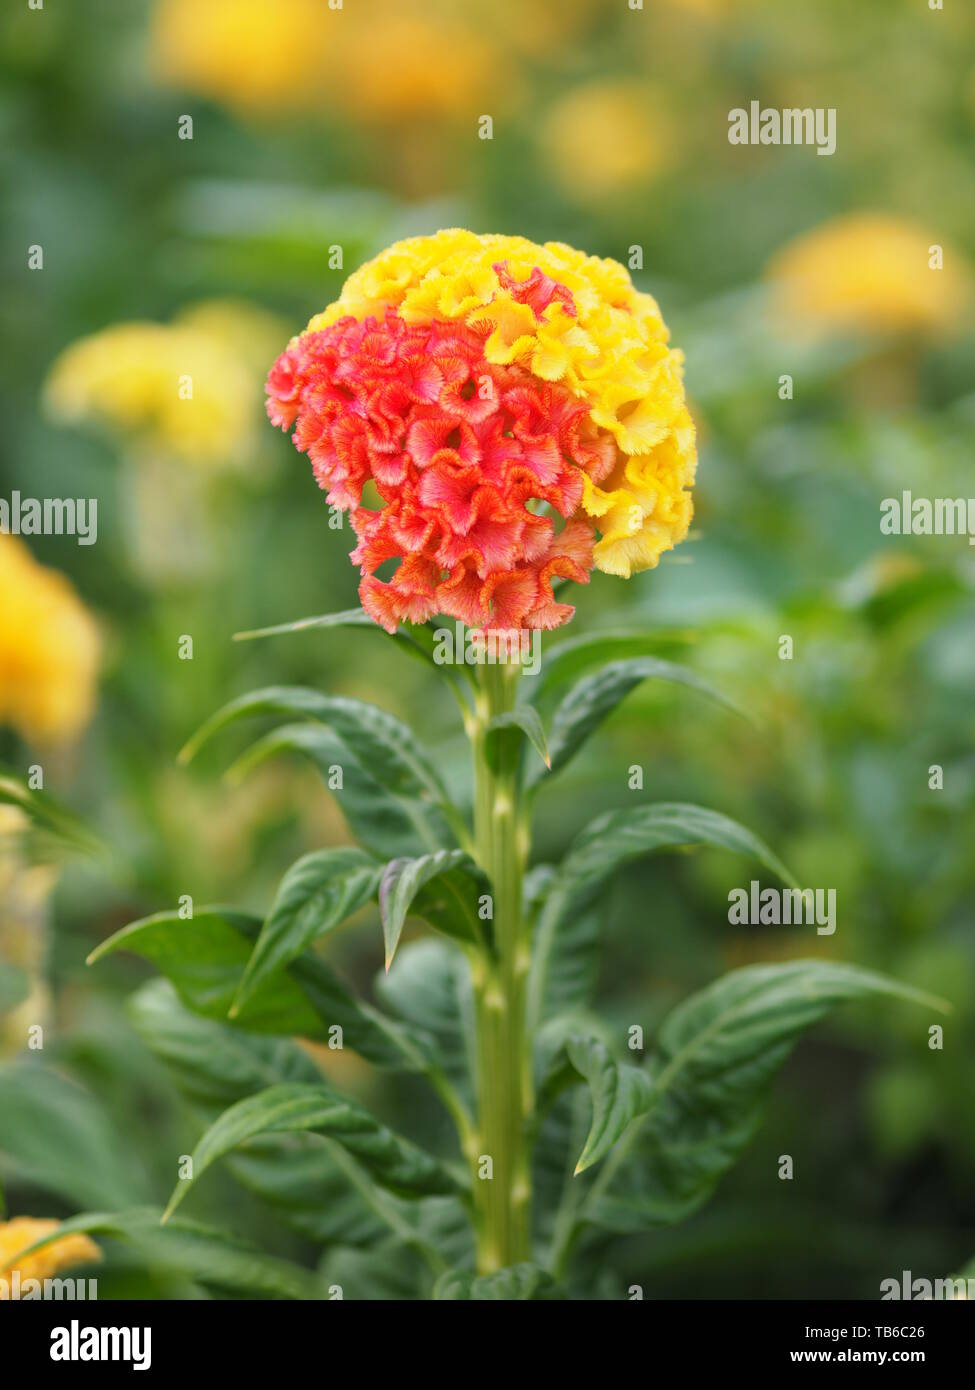 red and yellow Cockscomb flowers Name of Celosia cristata The flowers are small in size but will stick together into the same bouquet Stock Photo